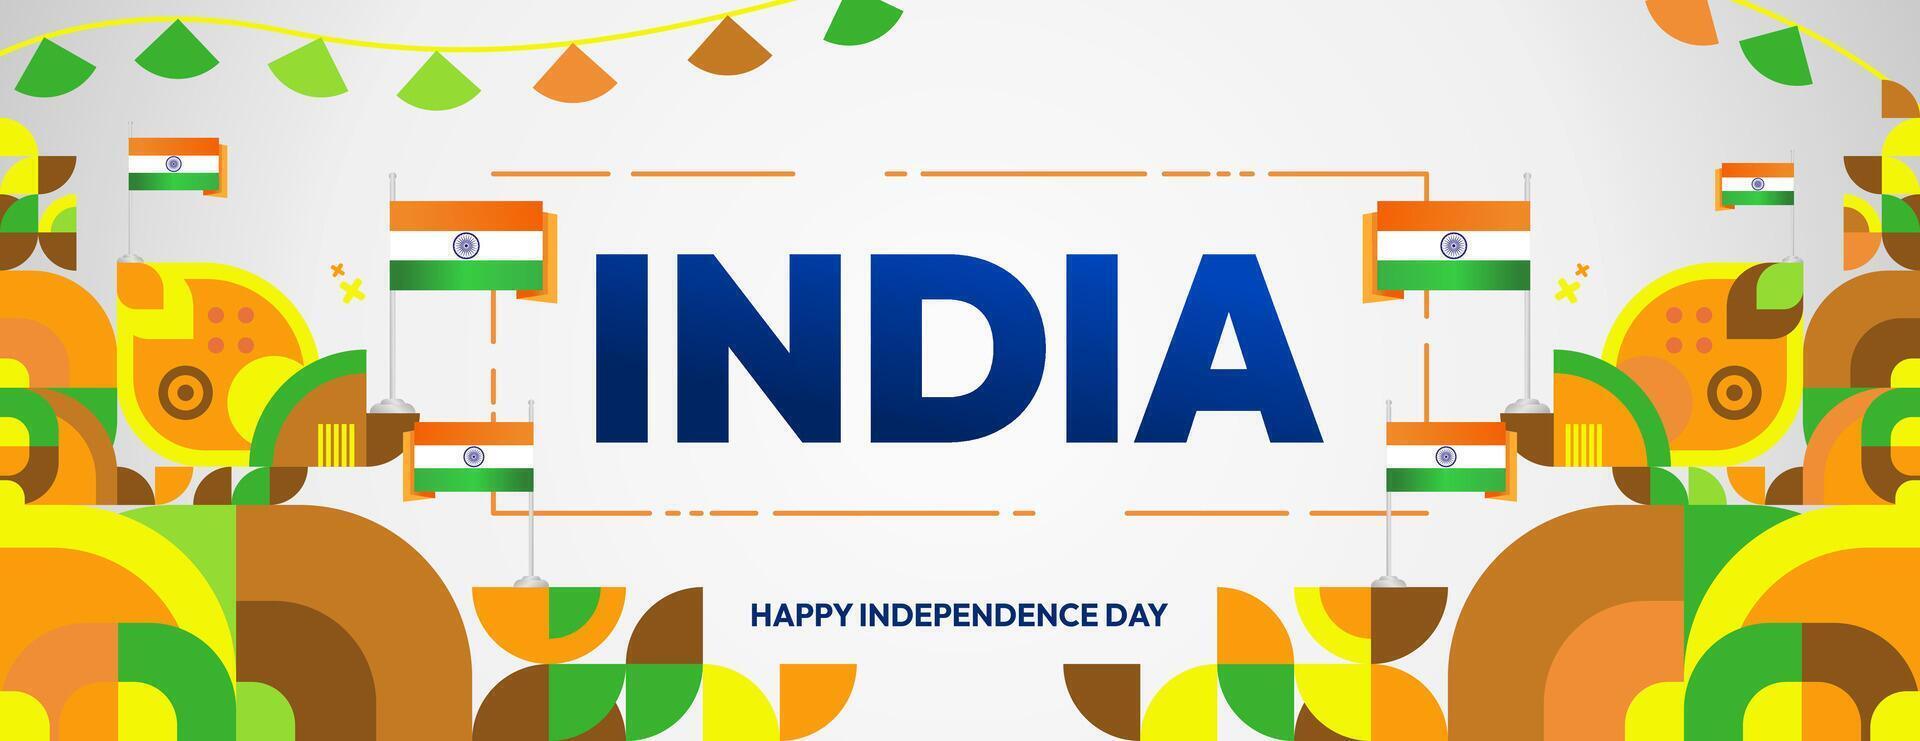 Indian Independence Day banner in colorful modern geometric style. Happy national independence day greeting card cover with typography. Vector illustration for national holiday celebration party